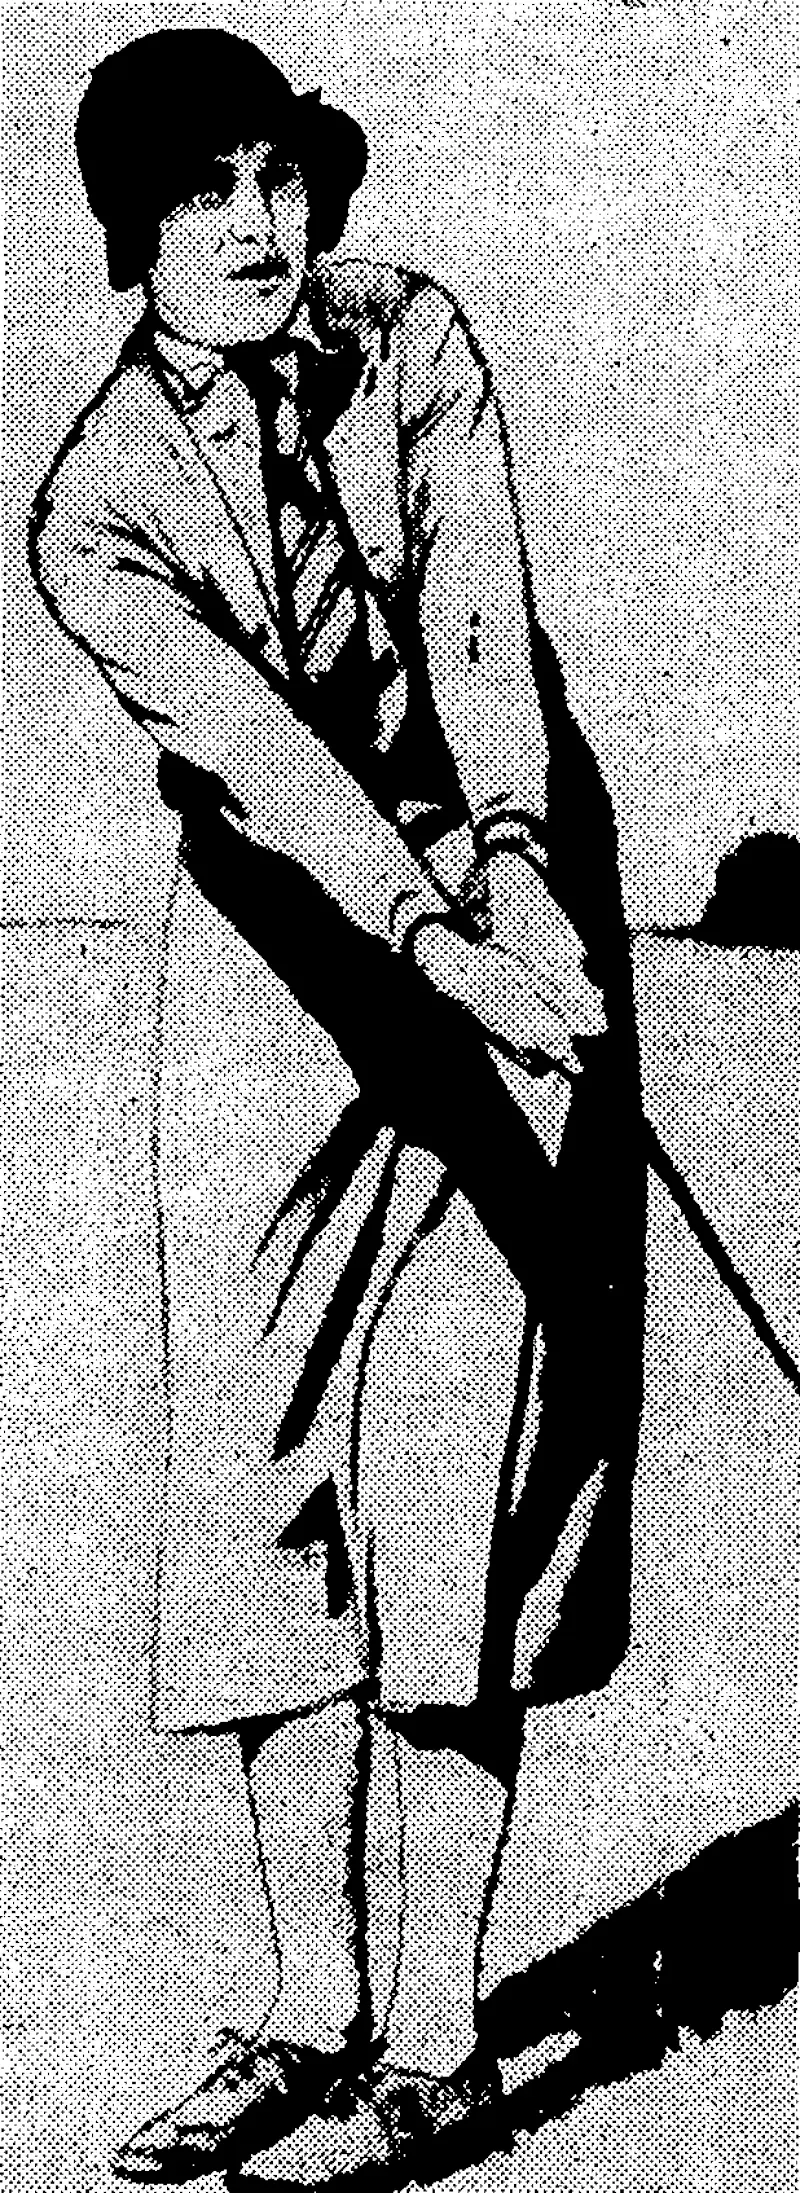 MISSO. LEFEBVBE, whoyeste* day. won the'4New South Wales women's golf championship, defeating Miss Cohy in the final. (Evening Post, 15 July 1933)